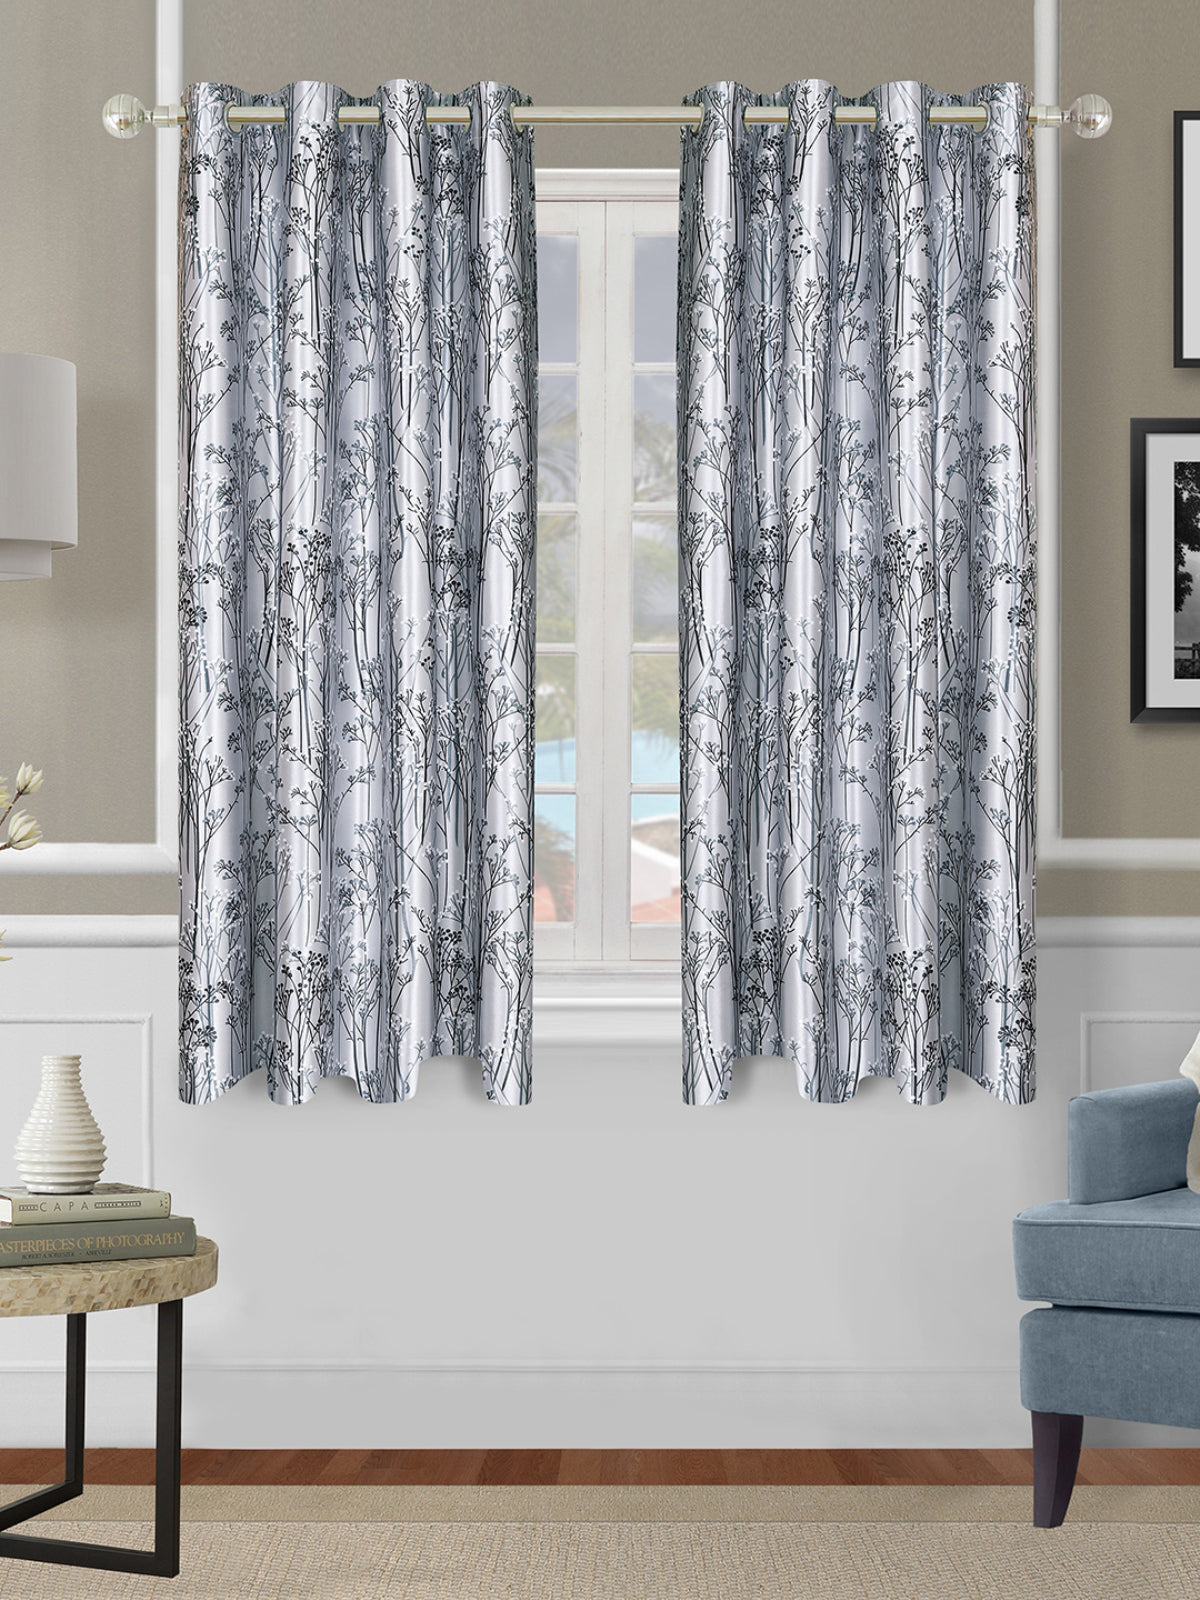 Romee Grey Leafy Patterned Set of 2 Window Curtains